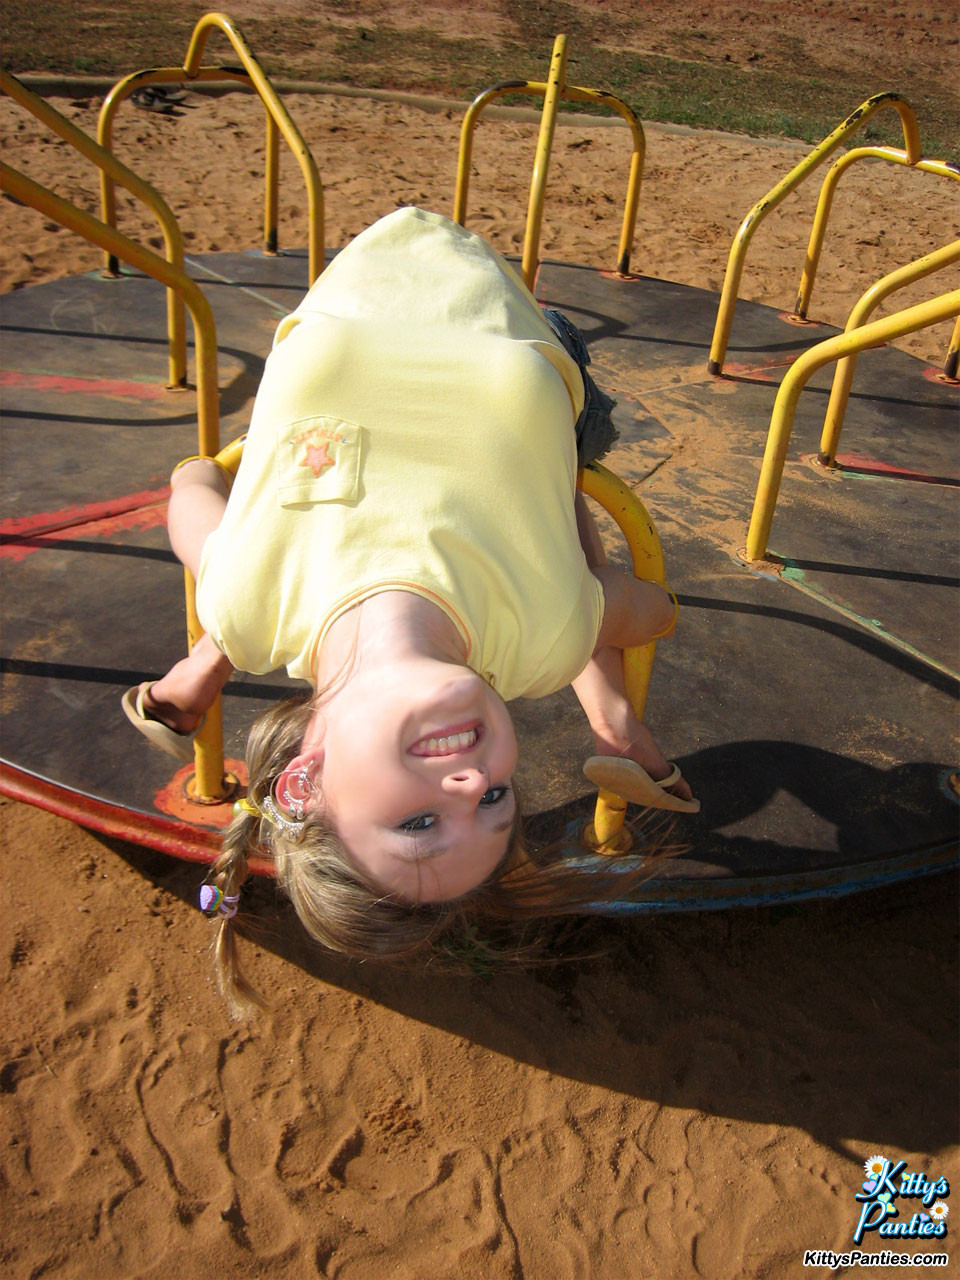 Kitty shares her upskirt pics from the playground #67244368